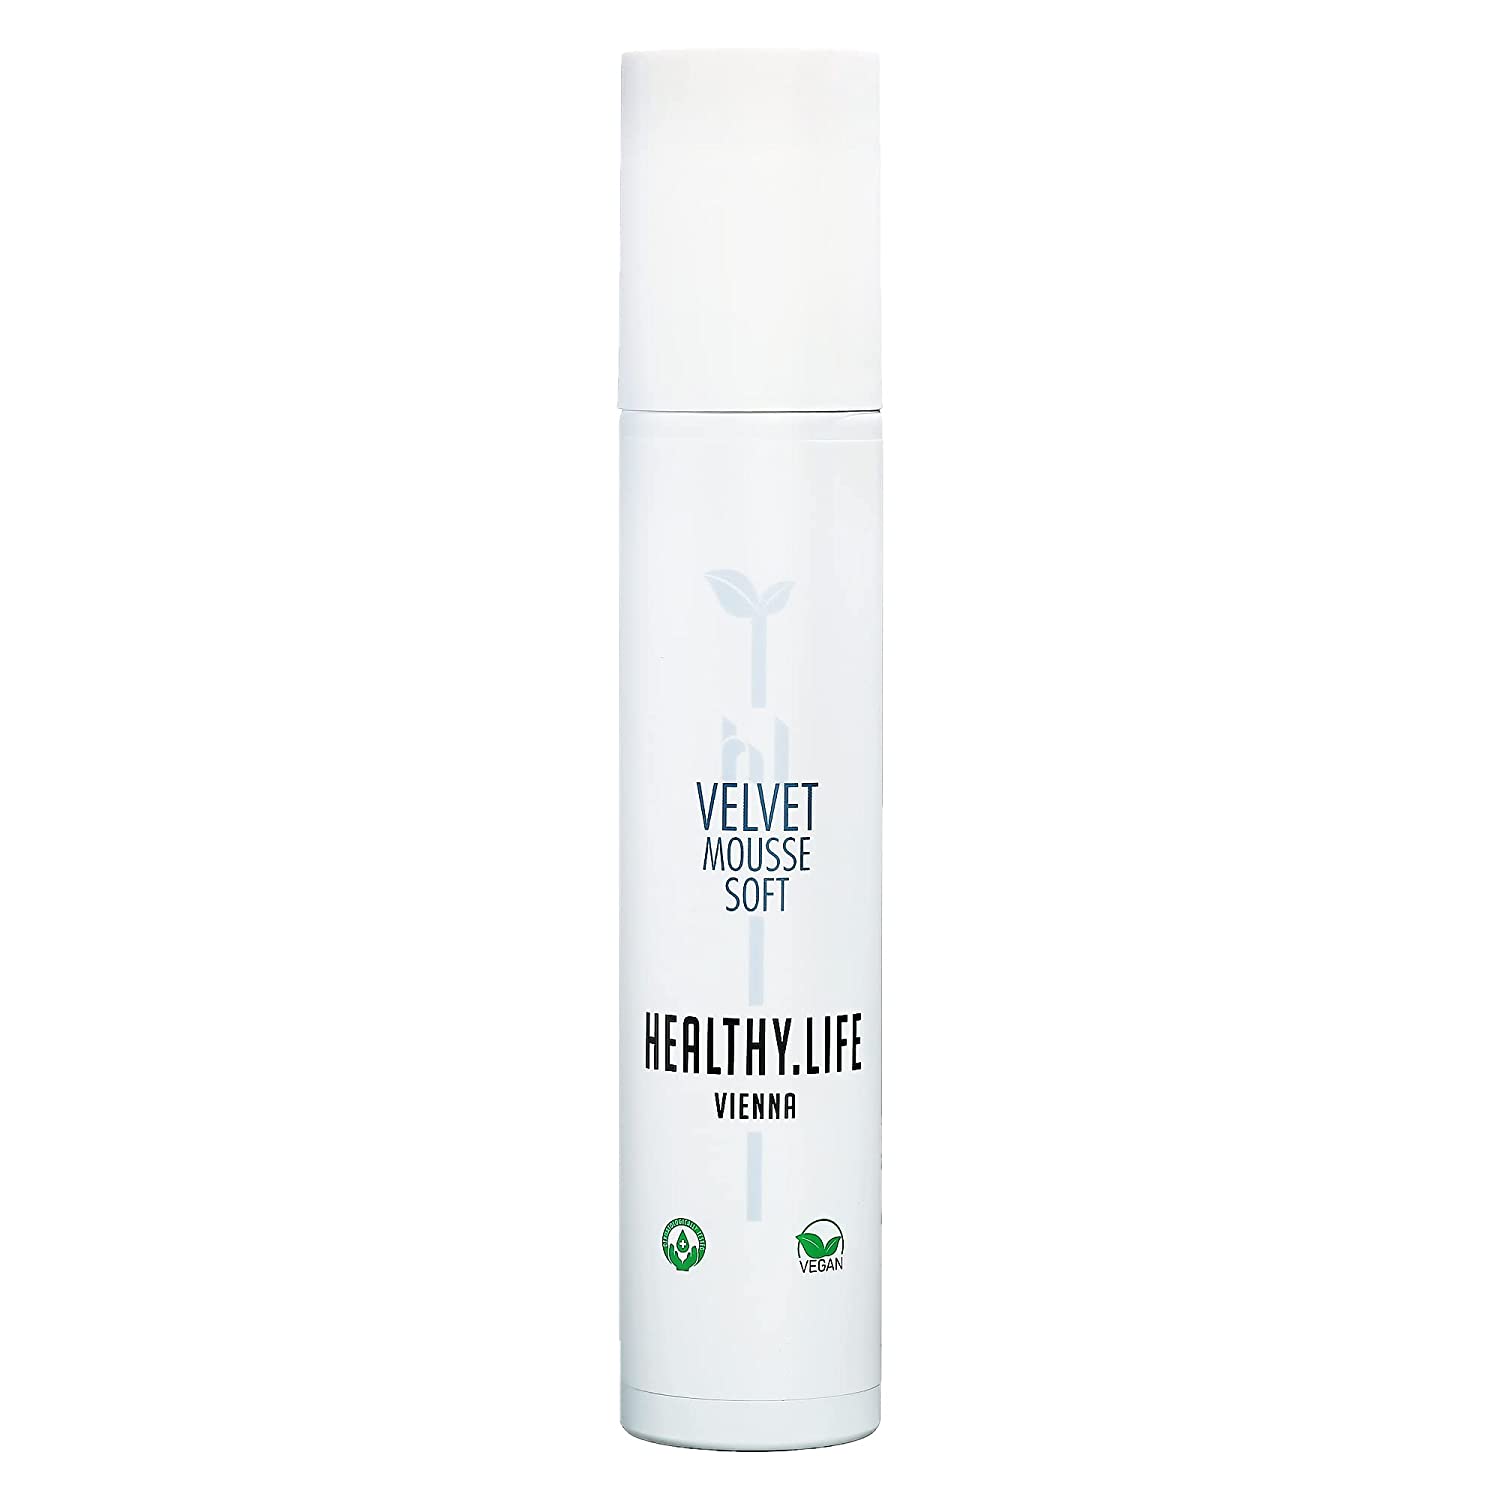 healthy.life Healthy Life Vienna Velvet Mousse Soft Vegan Volume Foam, Foam Resistant, Flexible and Natural Hold, Mousse Volume Fine Hair, Volume and for Blow-Drying, Curl Strengthener with Conditioner, 200 ml